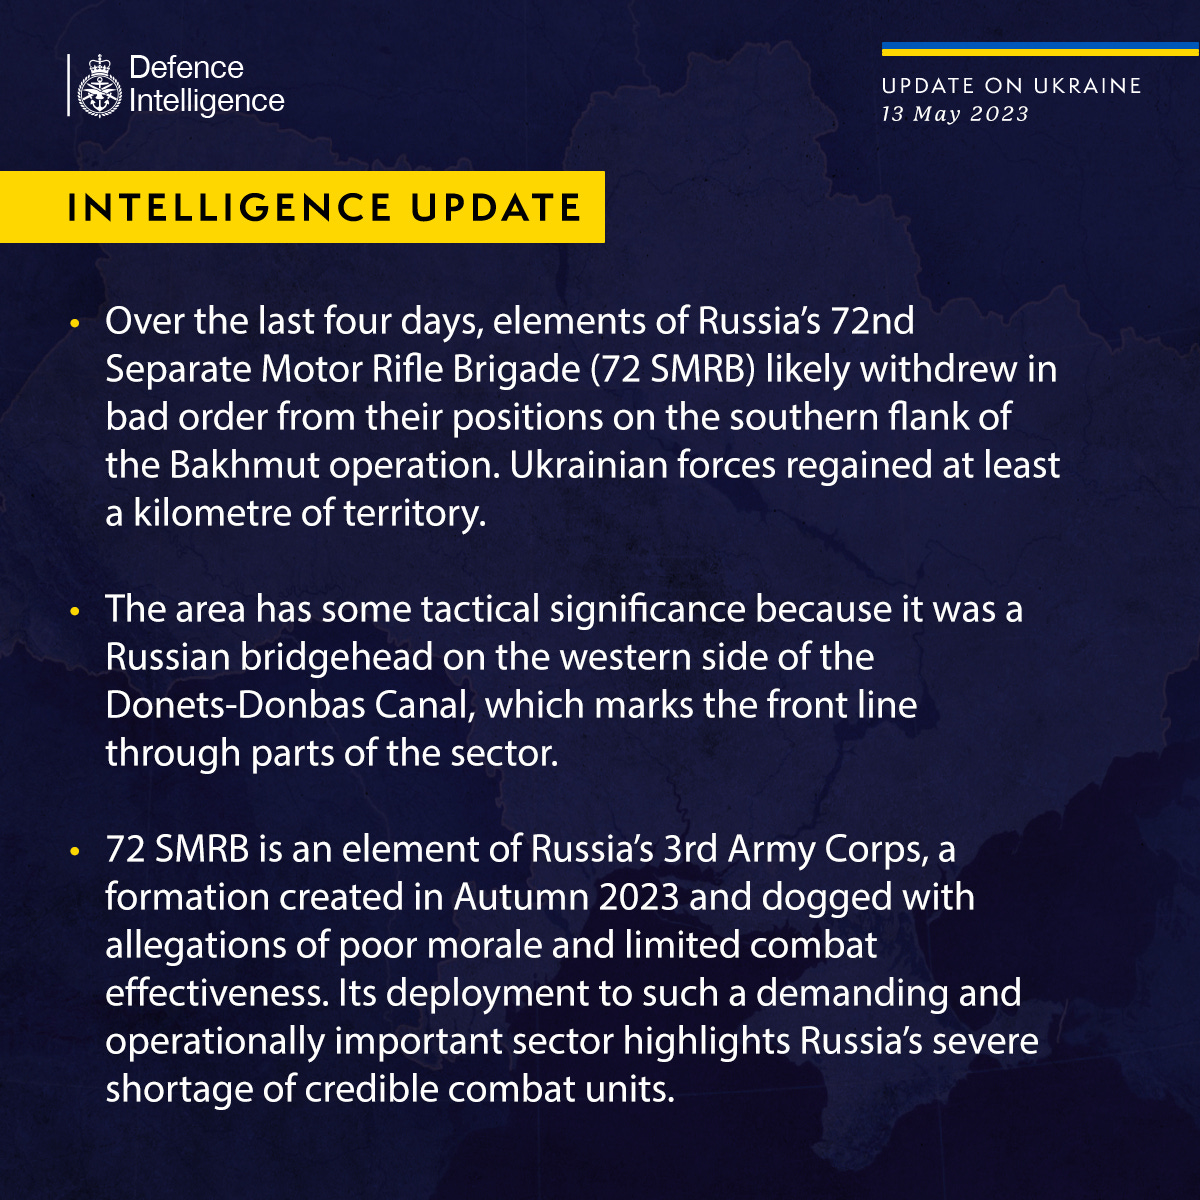 Latest Defence Intelligence update on the situation in Ukraine - 13 May 2023. Please read thread below for full image text.